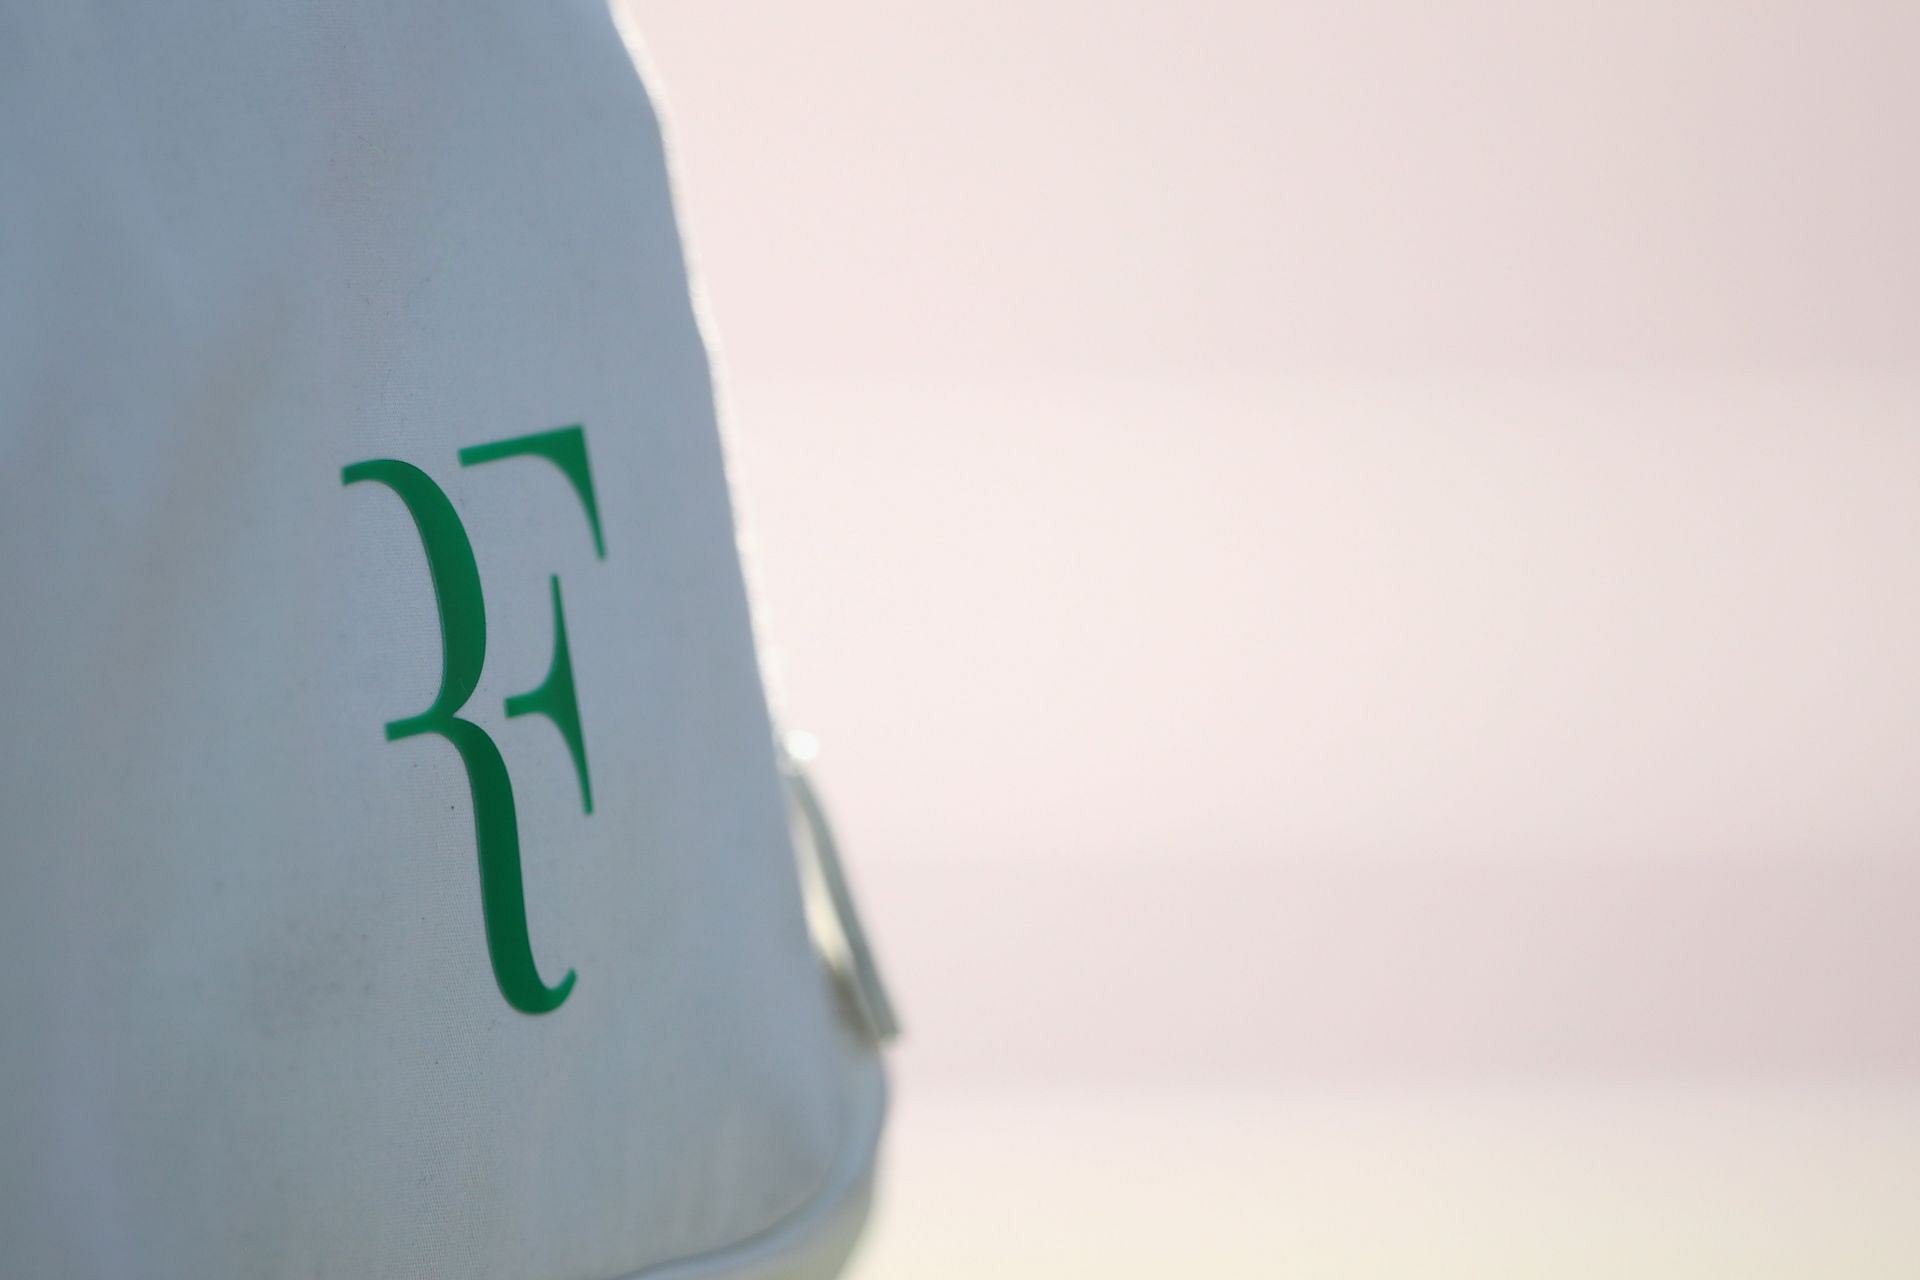 Roger Federer&#039;s logo as seen on his bag. (PC: Getty Images)